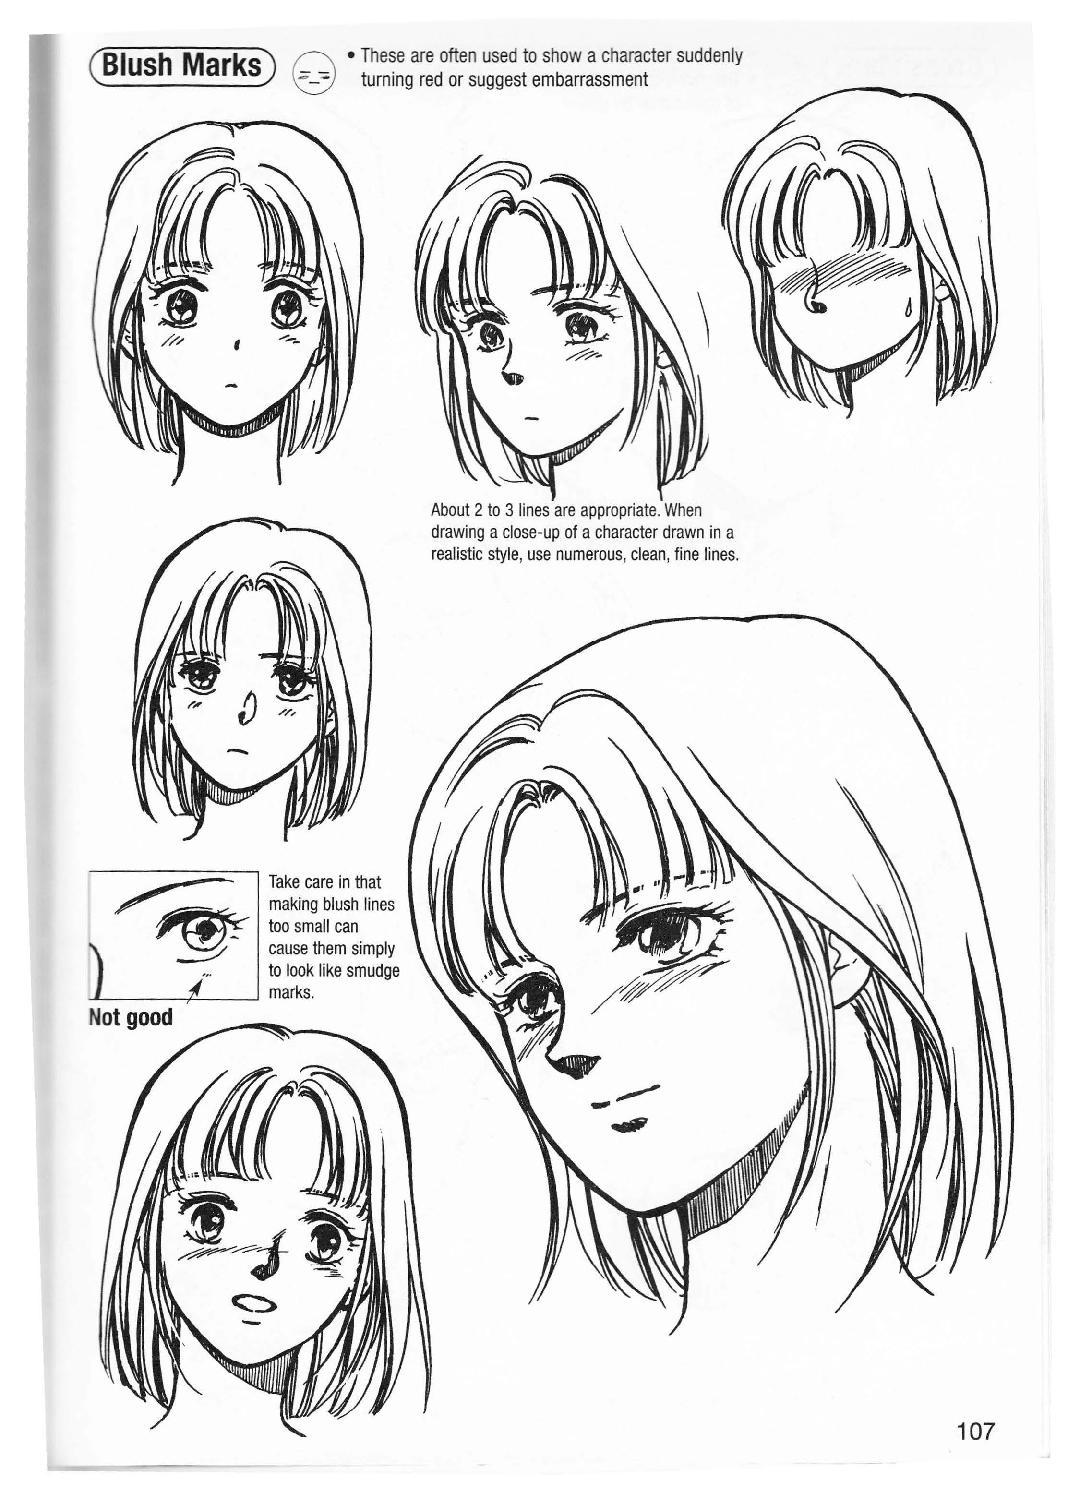 More How to Draw Manga Vol. 2 - Penning Characters 108